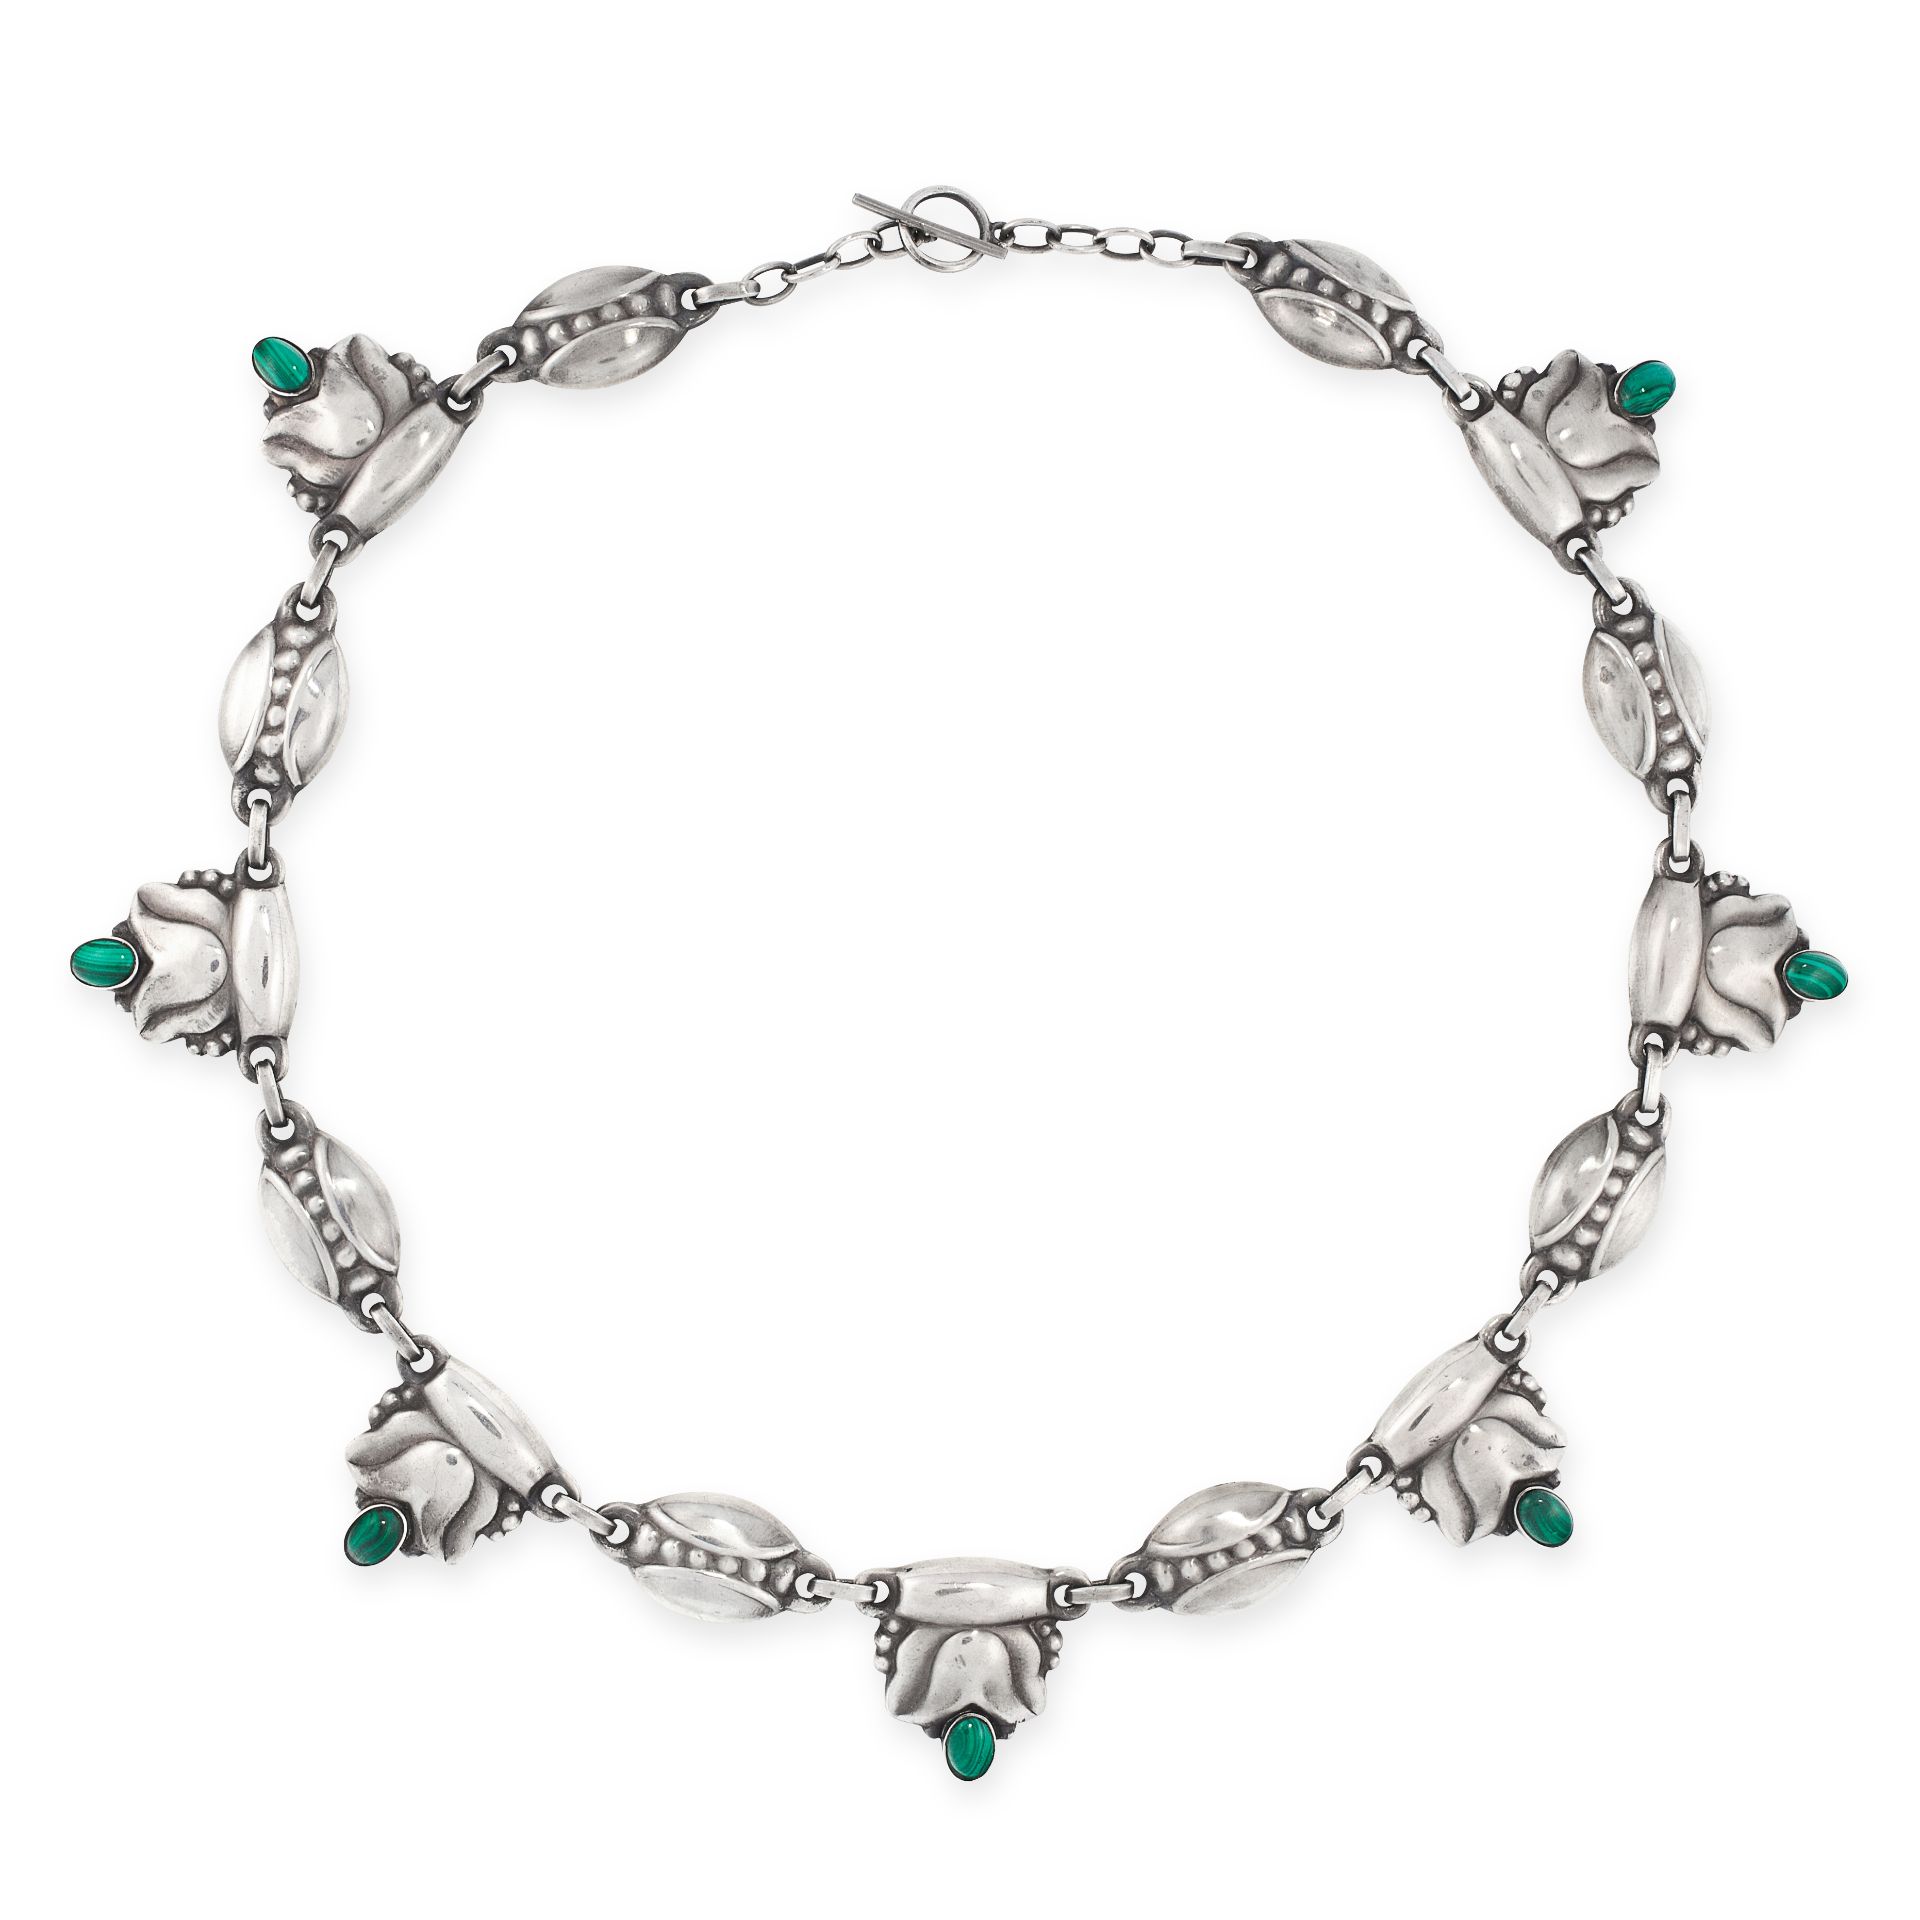 A MALACHITE NECKLACE, GEORG JENSEN 1933-1944 in silver, design number 3, the alternating oval and